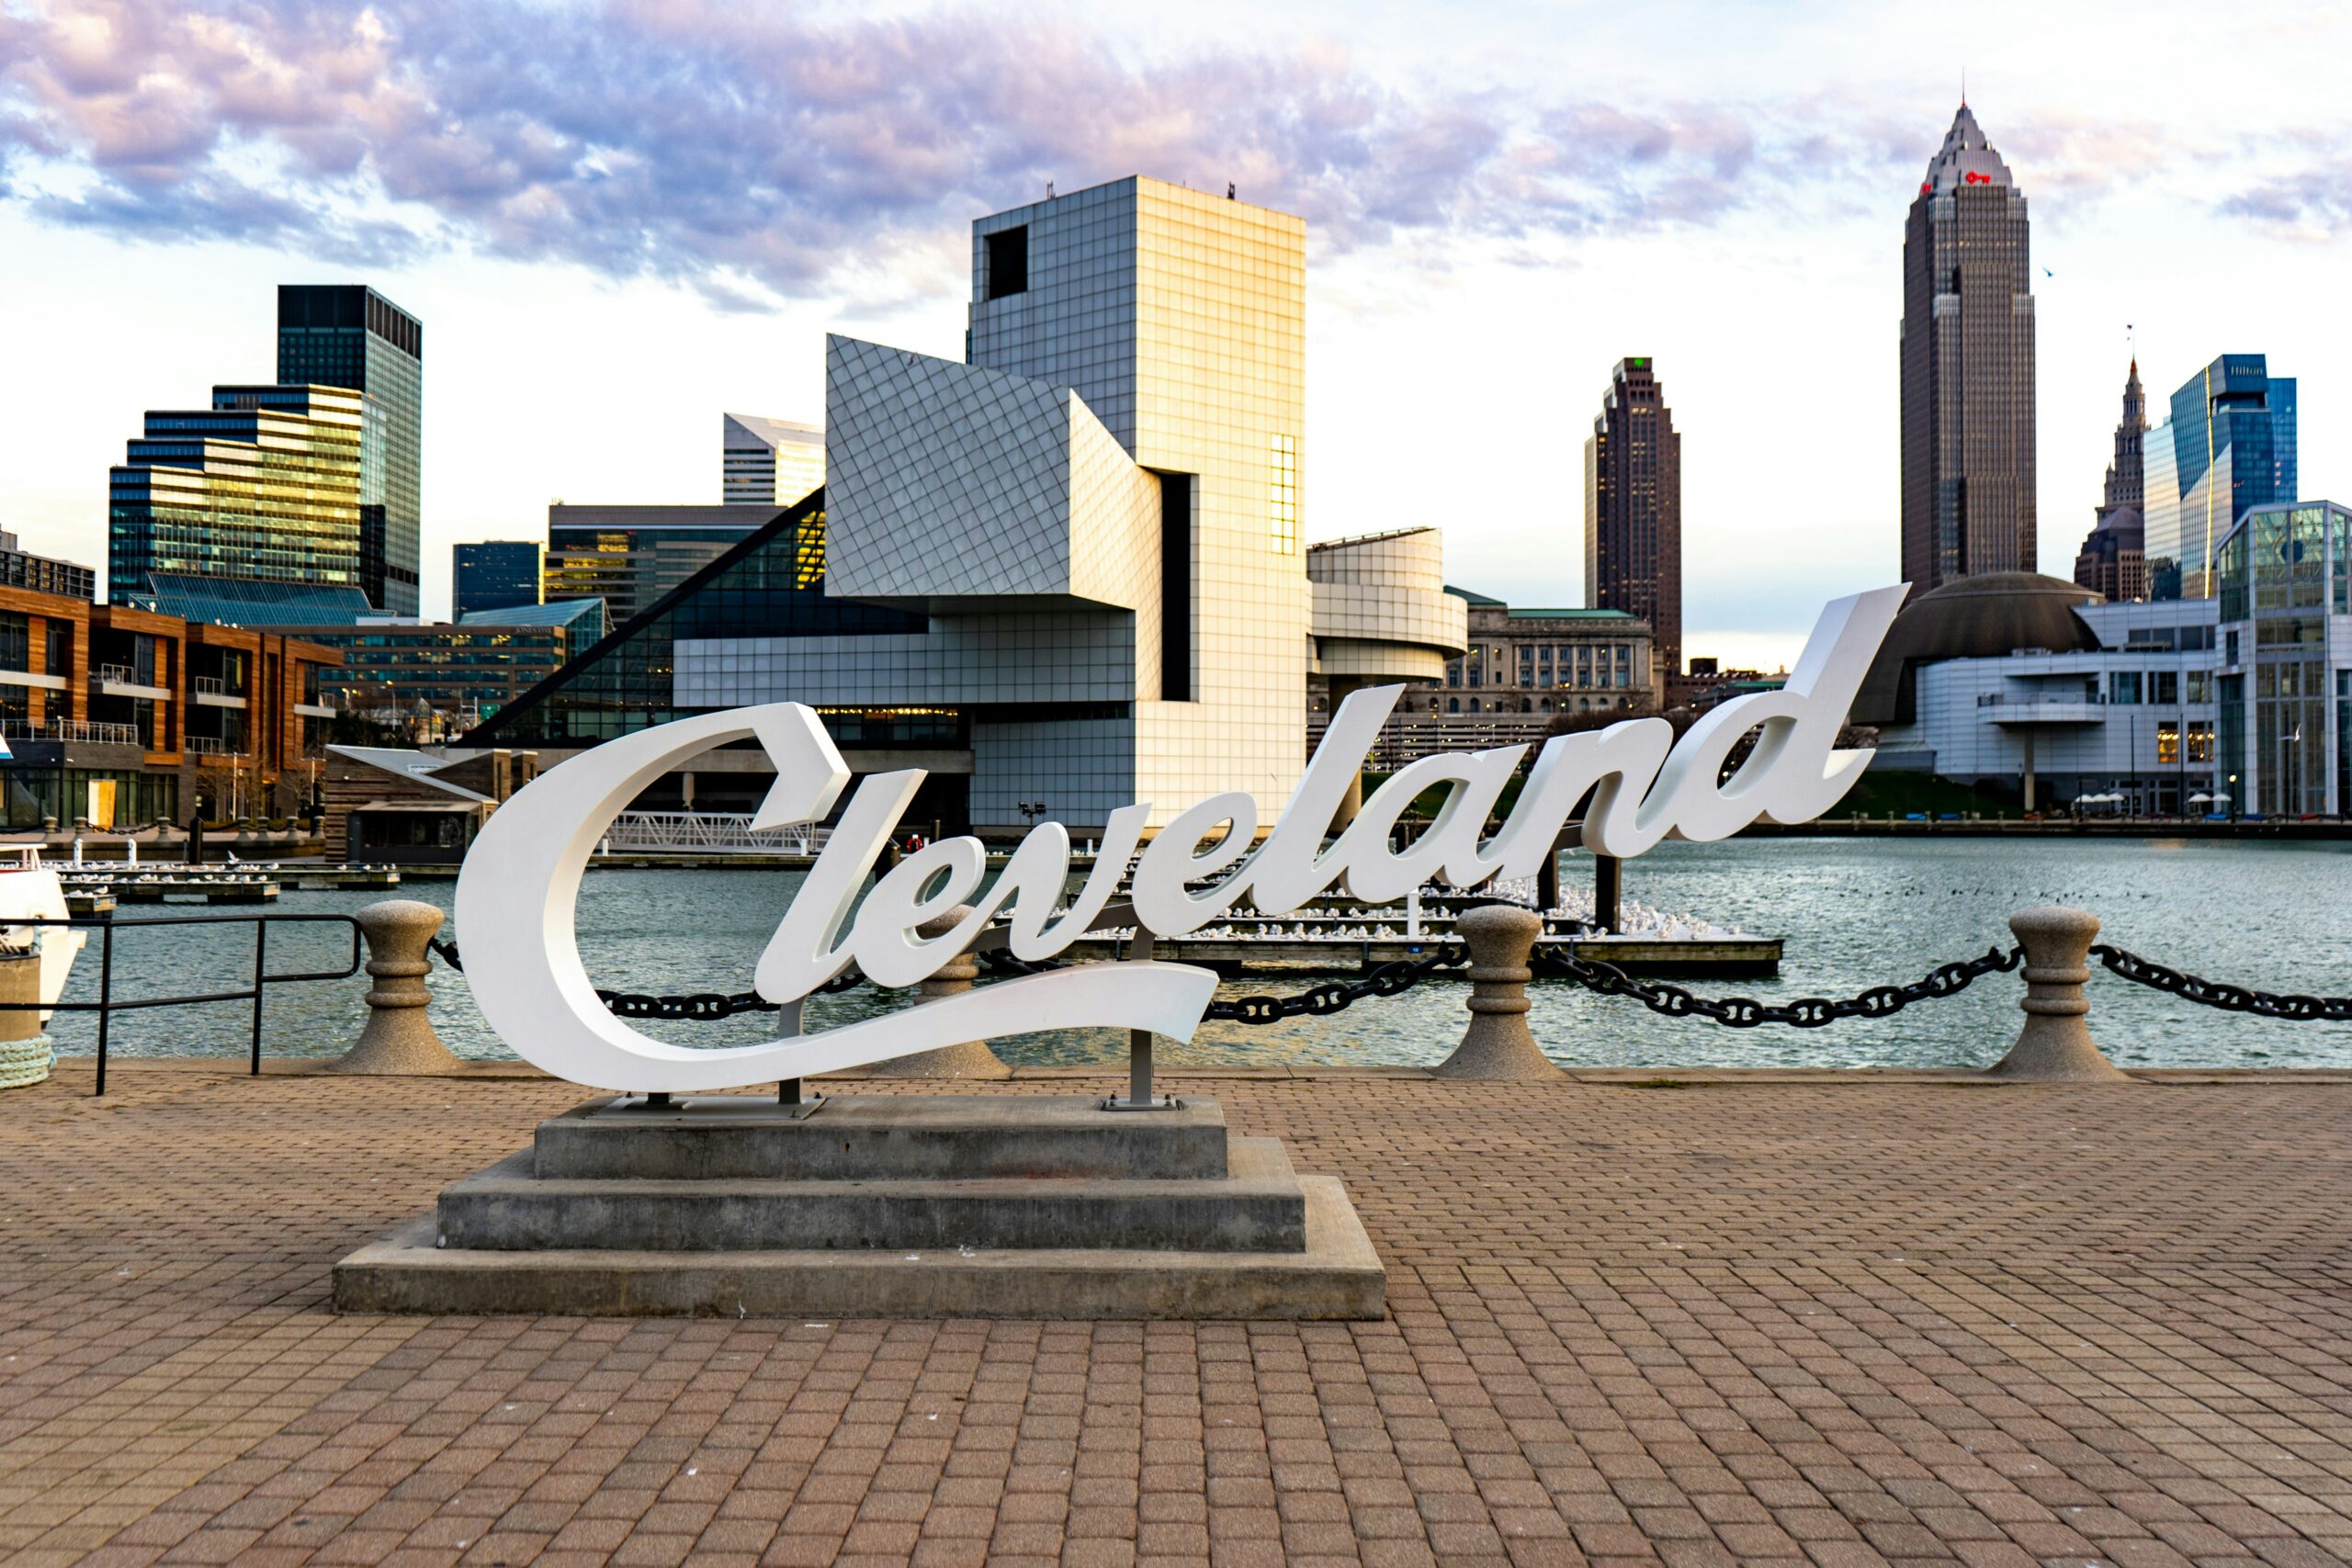 Top 5 Sporting Goods Stores in Cleveland: Find what you need